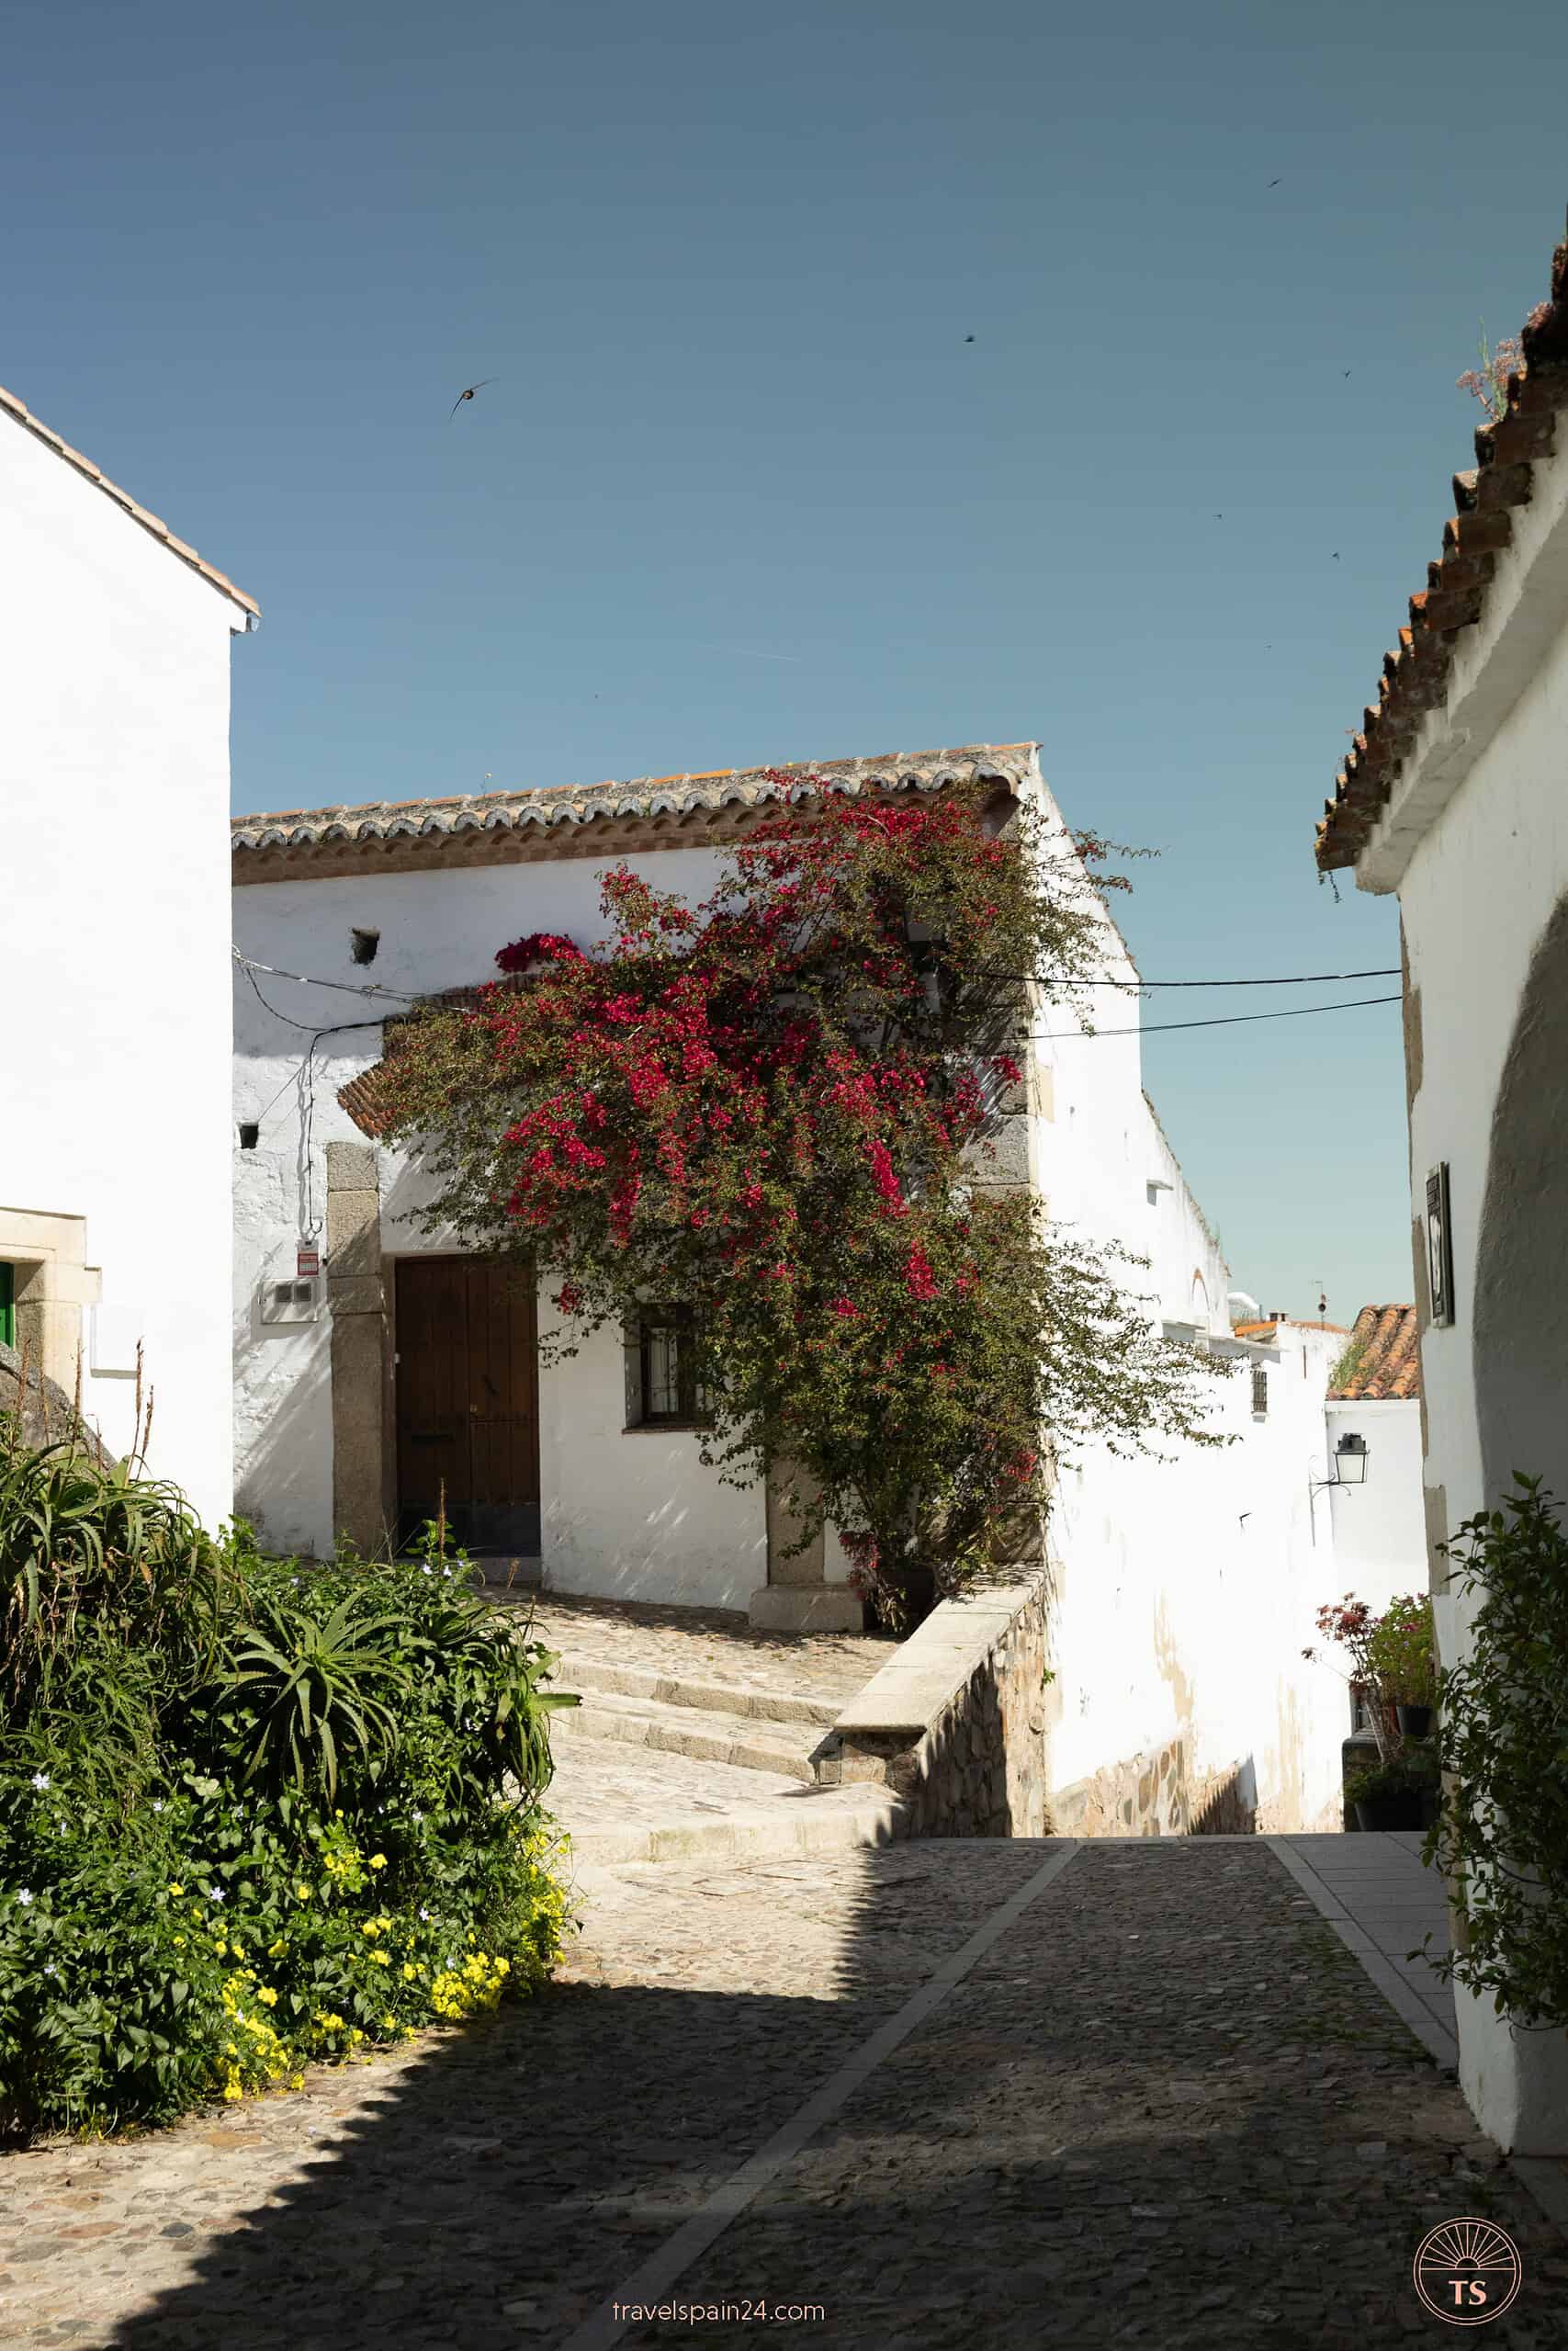 A scenic street in the Old Jewish Quarter of Cáceres near Baluarte de los Pozos, with whitewashed houses and birds flying in the blue sky.